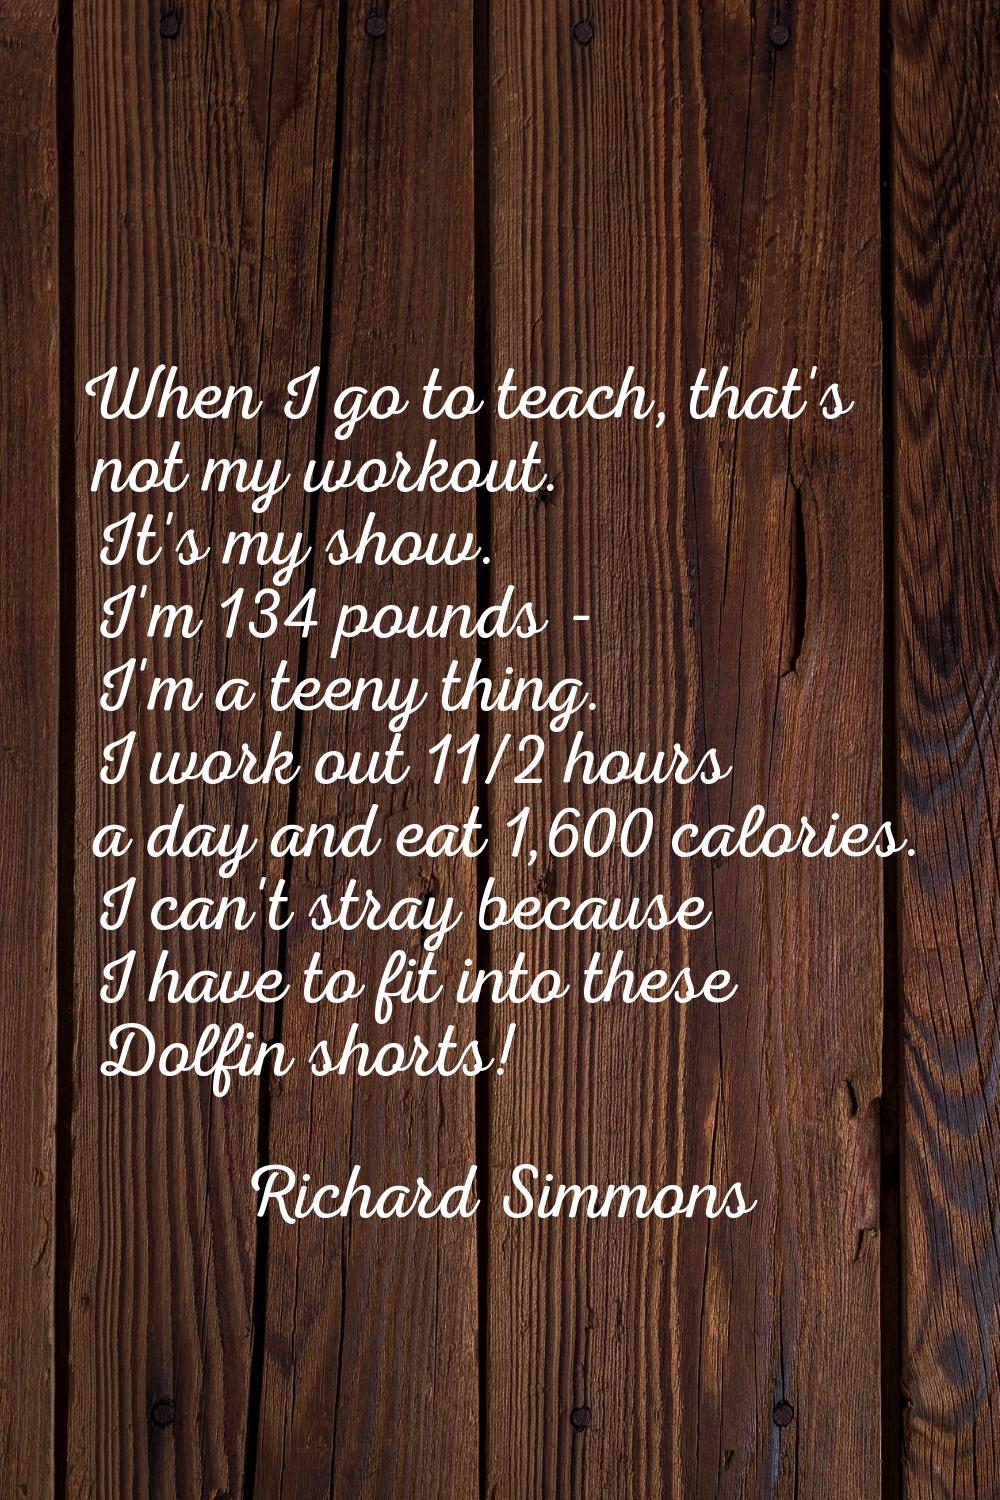 When I go to teach, that's not my workout. It's my show. I'm 134 pounds - I'm a teeny thing. I work